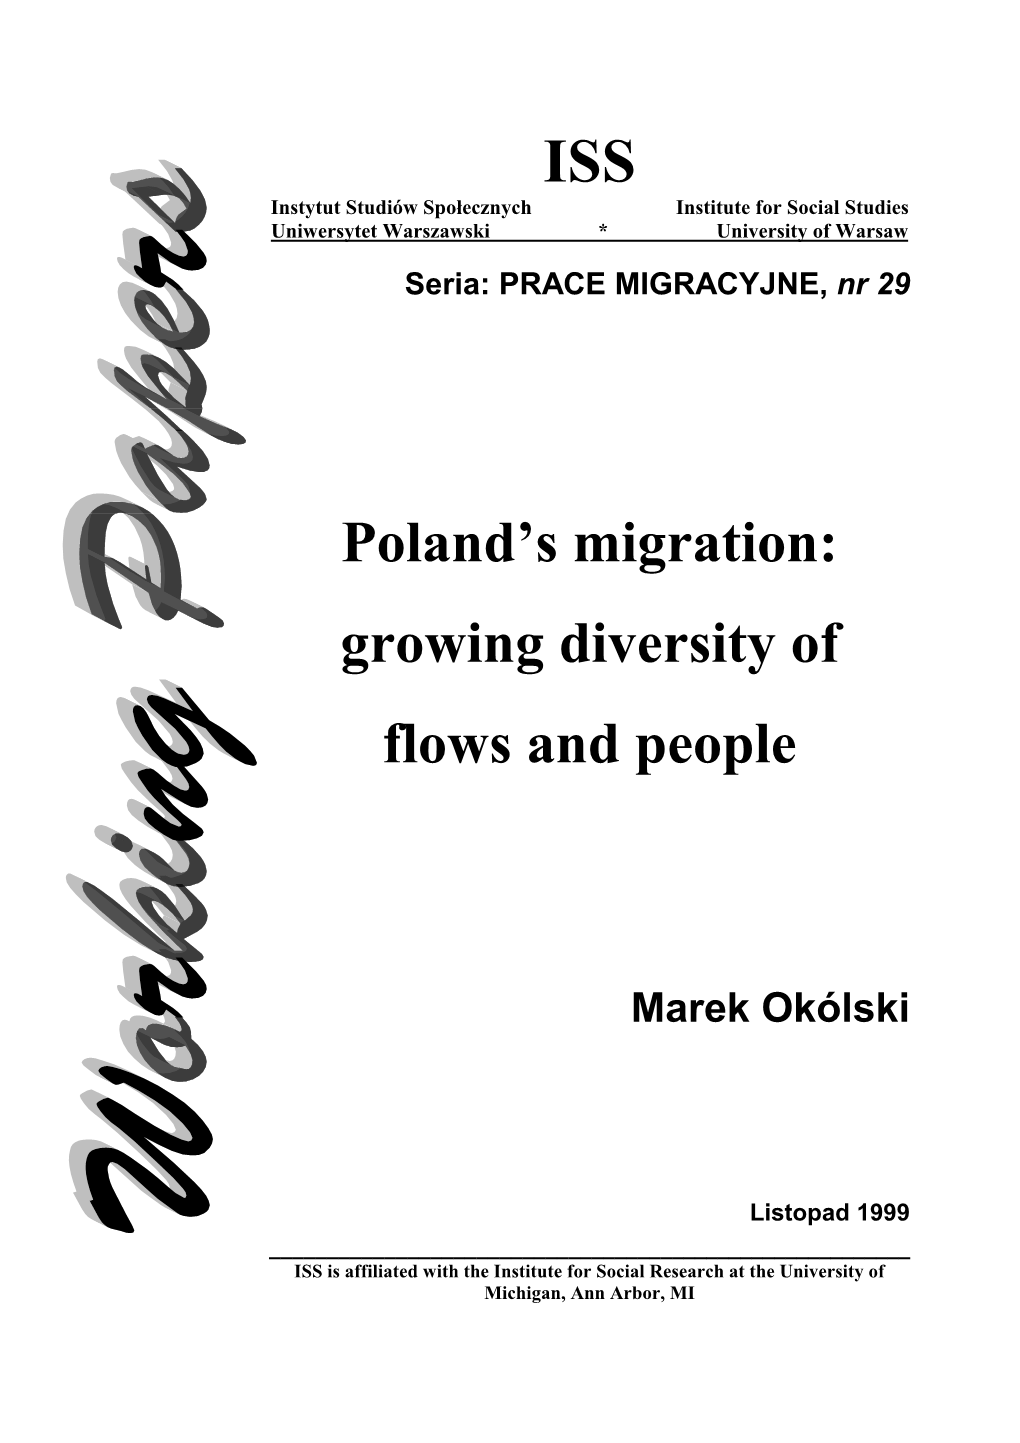 Poland's Migration: Growing Diversity of Flows and People